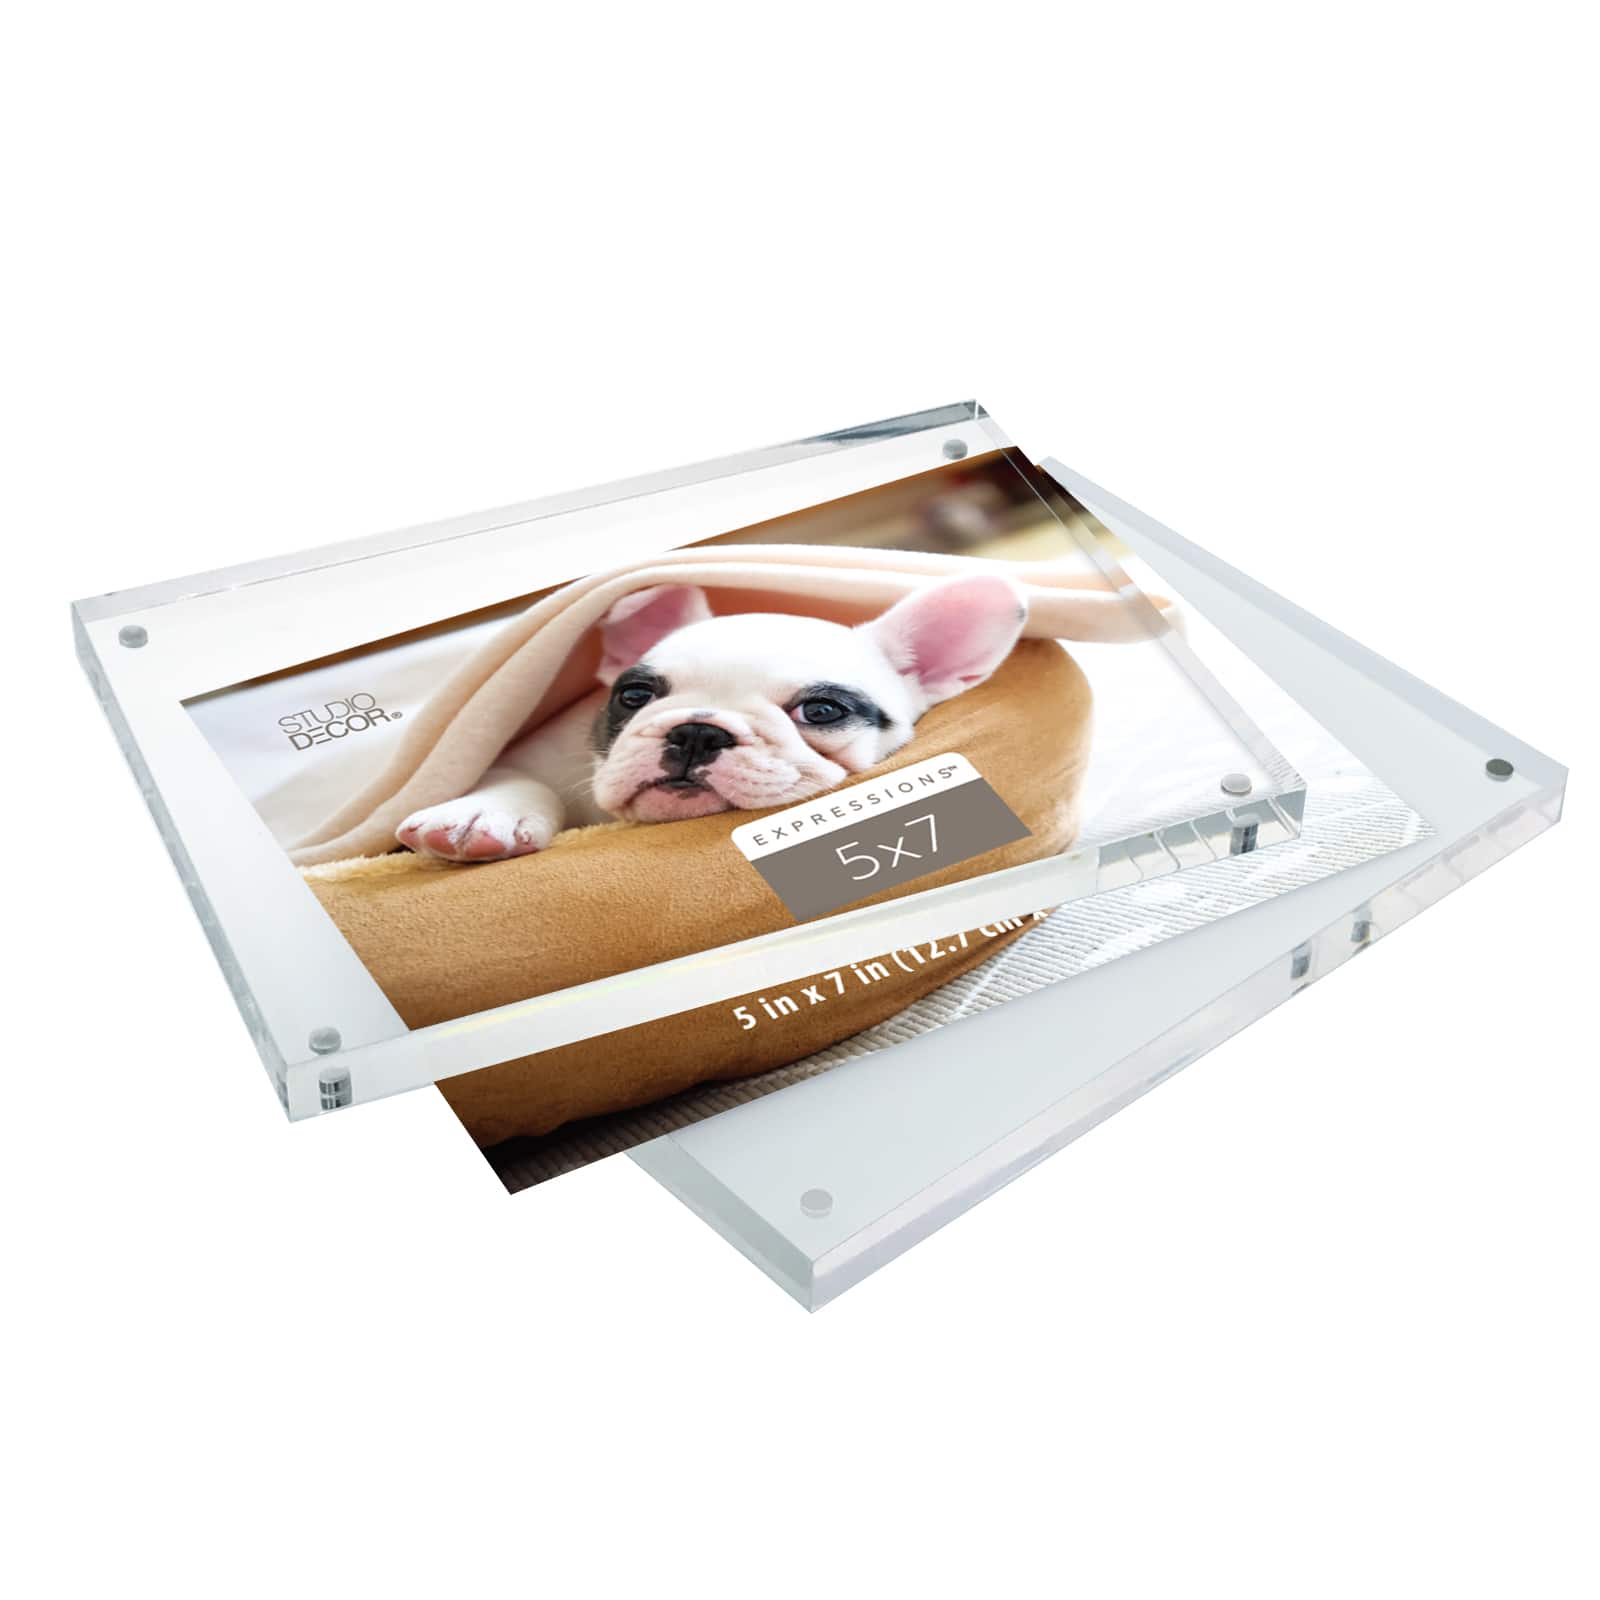 d7.CLR - Large Rectangular Solid Acrylic Block in Clear Perfect as an  Optical Frame Display